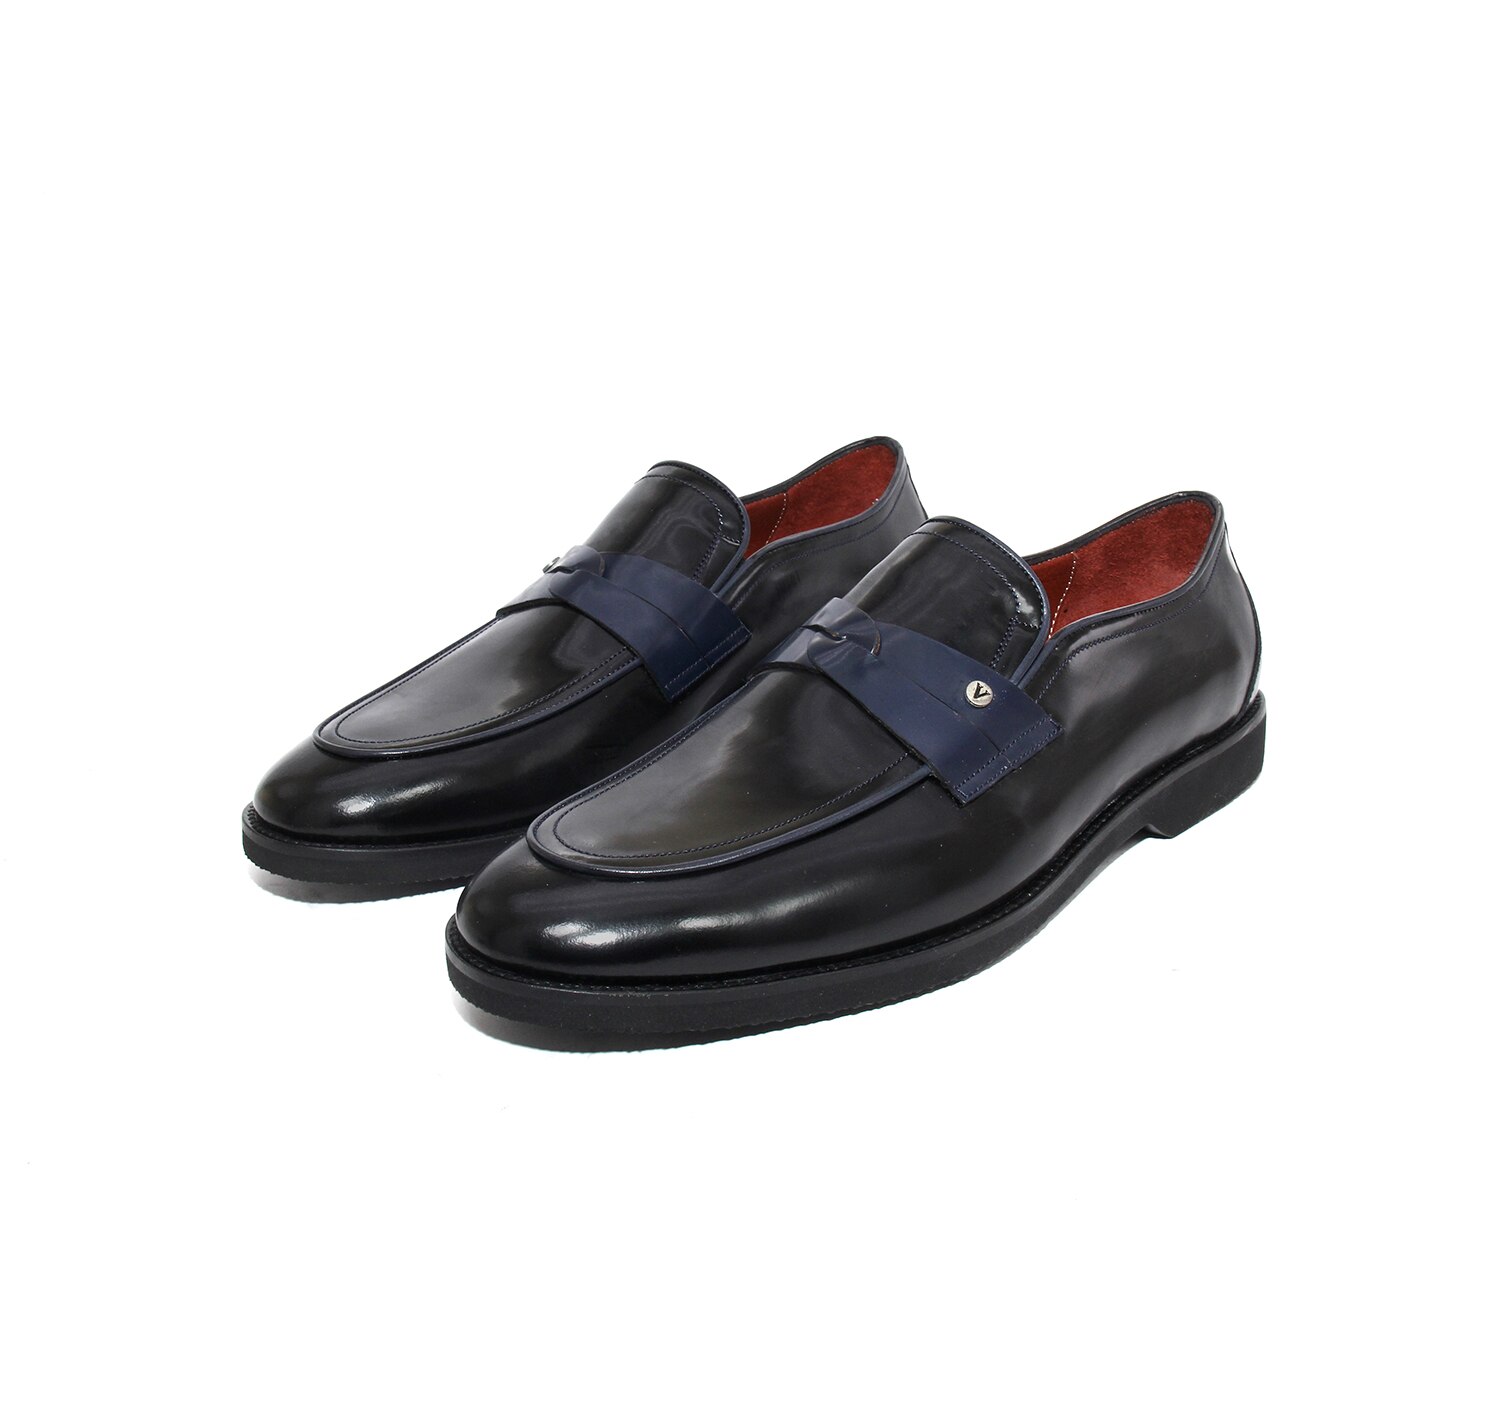 Handmade Dark Blue Classic Formal Loafers with Genuine Calfskin, Tanning Patent Leather, Lightweight EVA Sole, Leather Insole